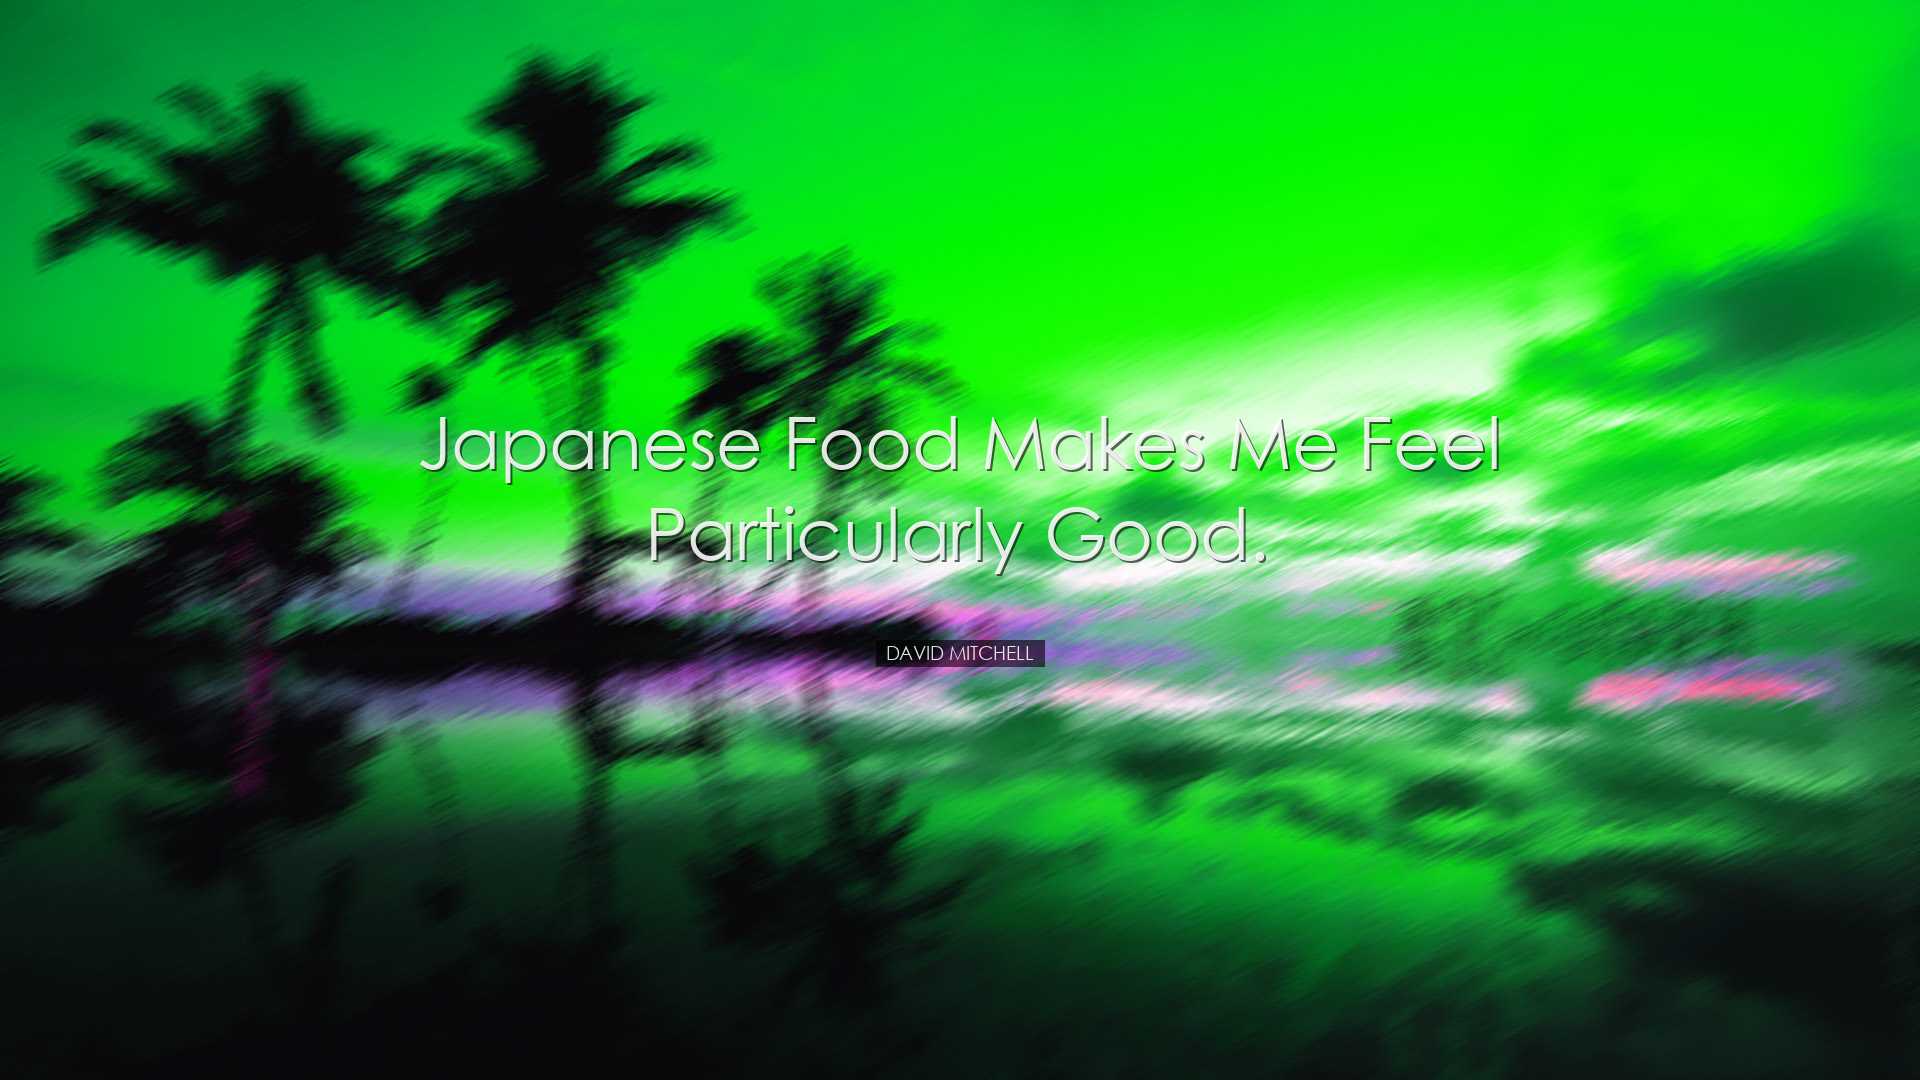 Japanese food makes me feel particularly good. - David Mitchell